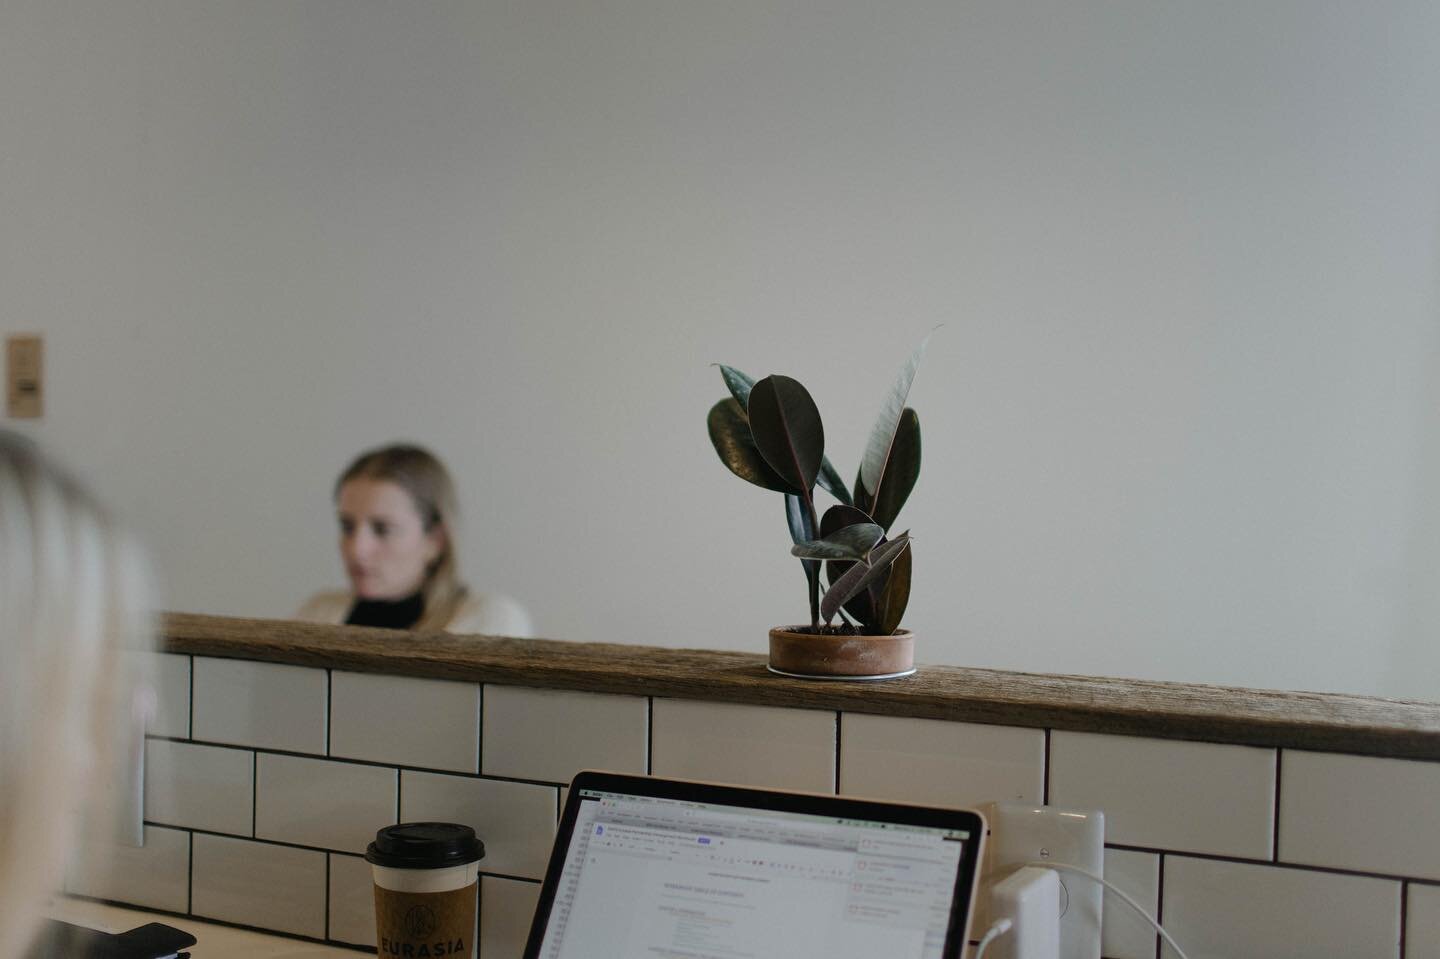 $10/day for the social desk, which includes free single-origin coffee, up to 10 prints if you need and access to a refrigerator/microwave. And most importantly - plants. Lots of plants.